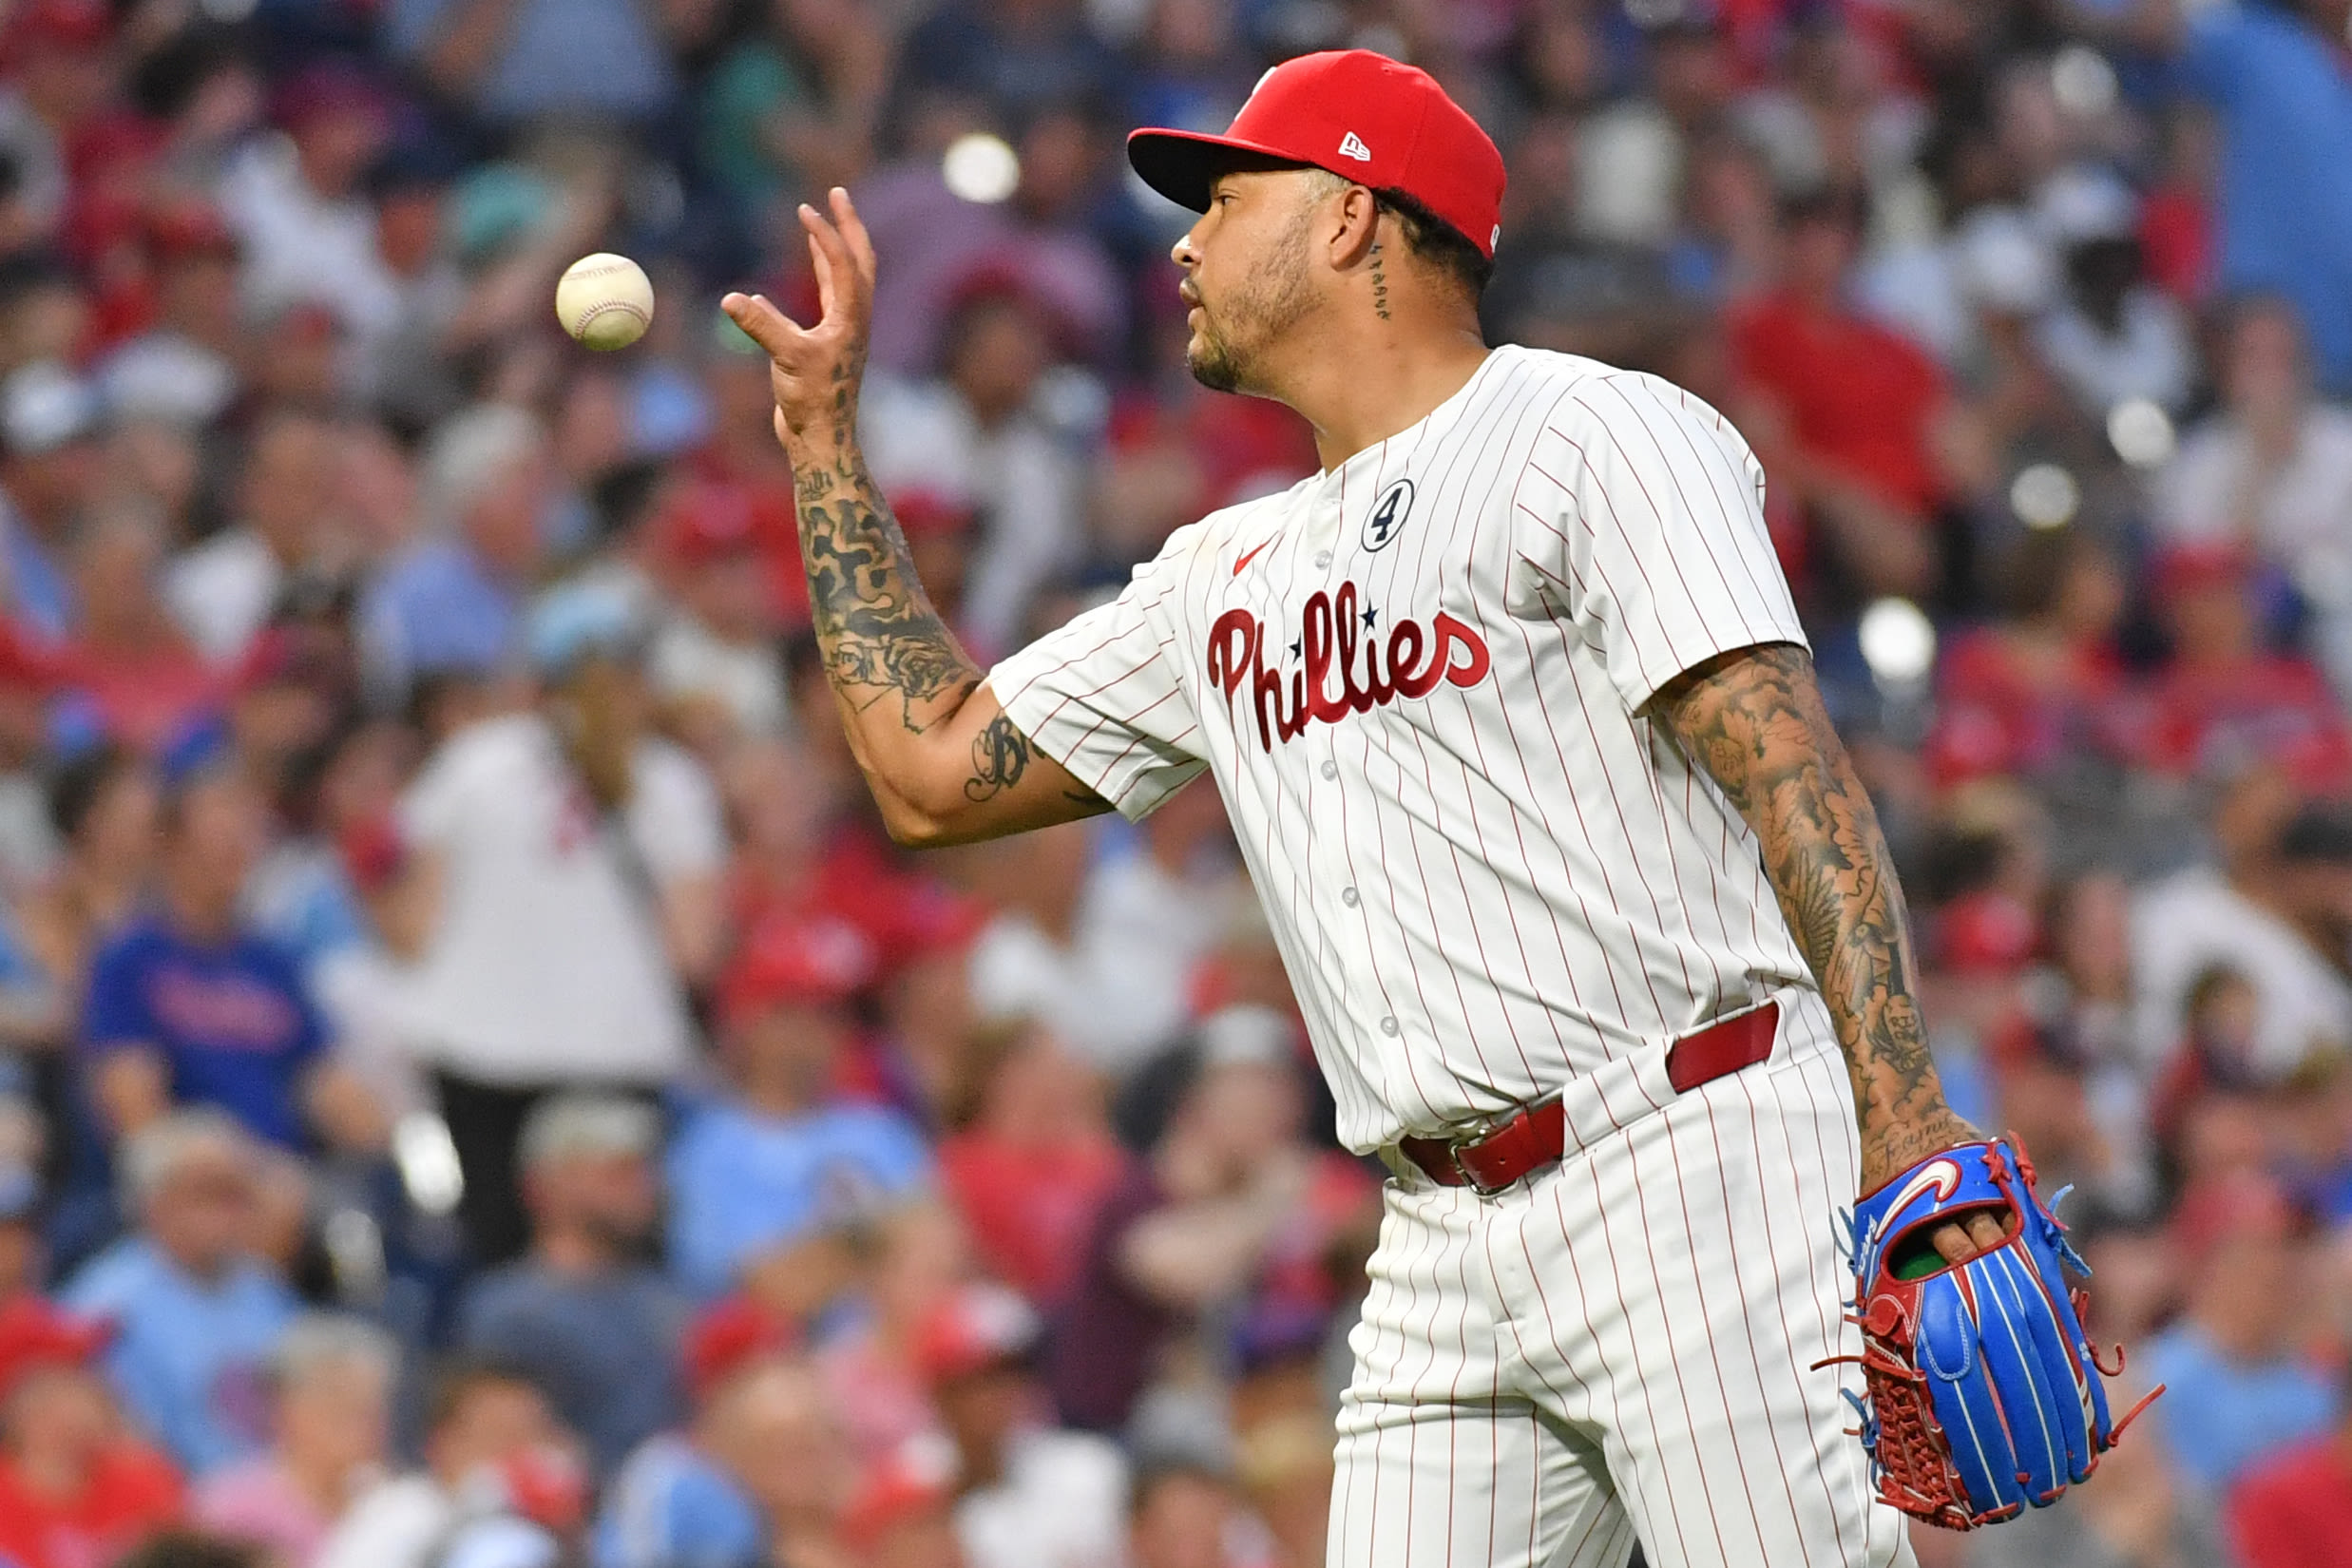 Phillies drop series finale vs. Cardinals, Marsh exits in 8th inning with hamstring injury